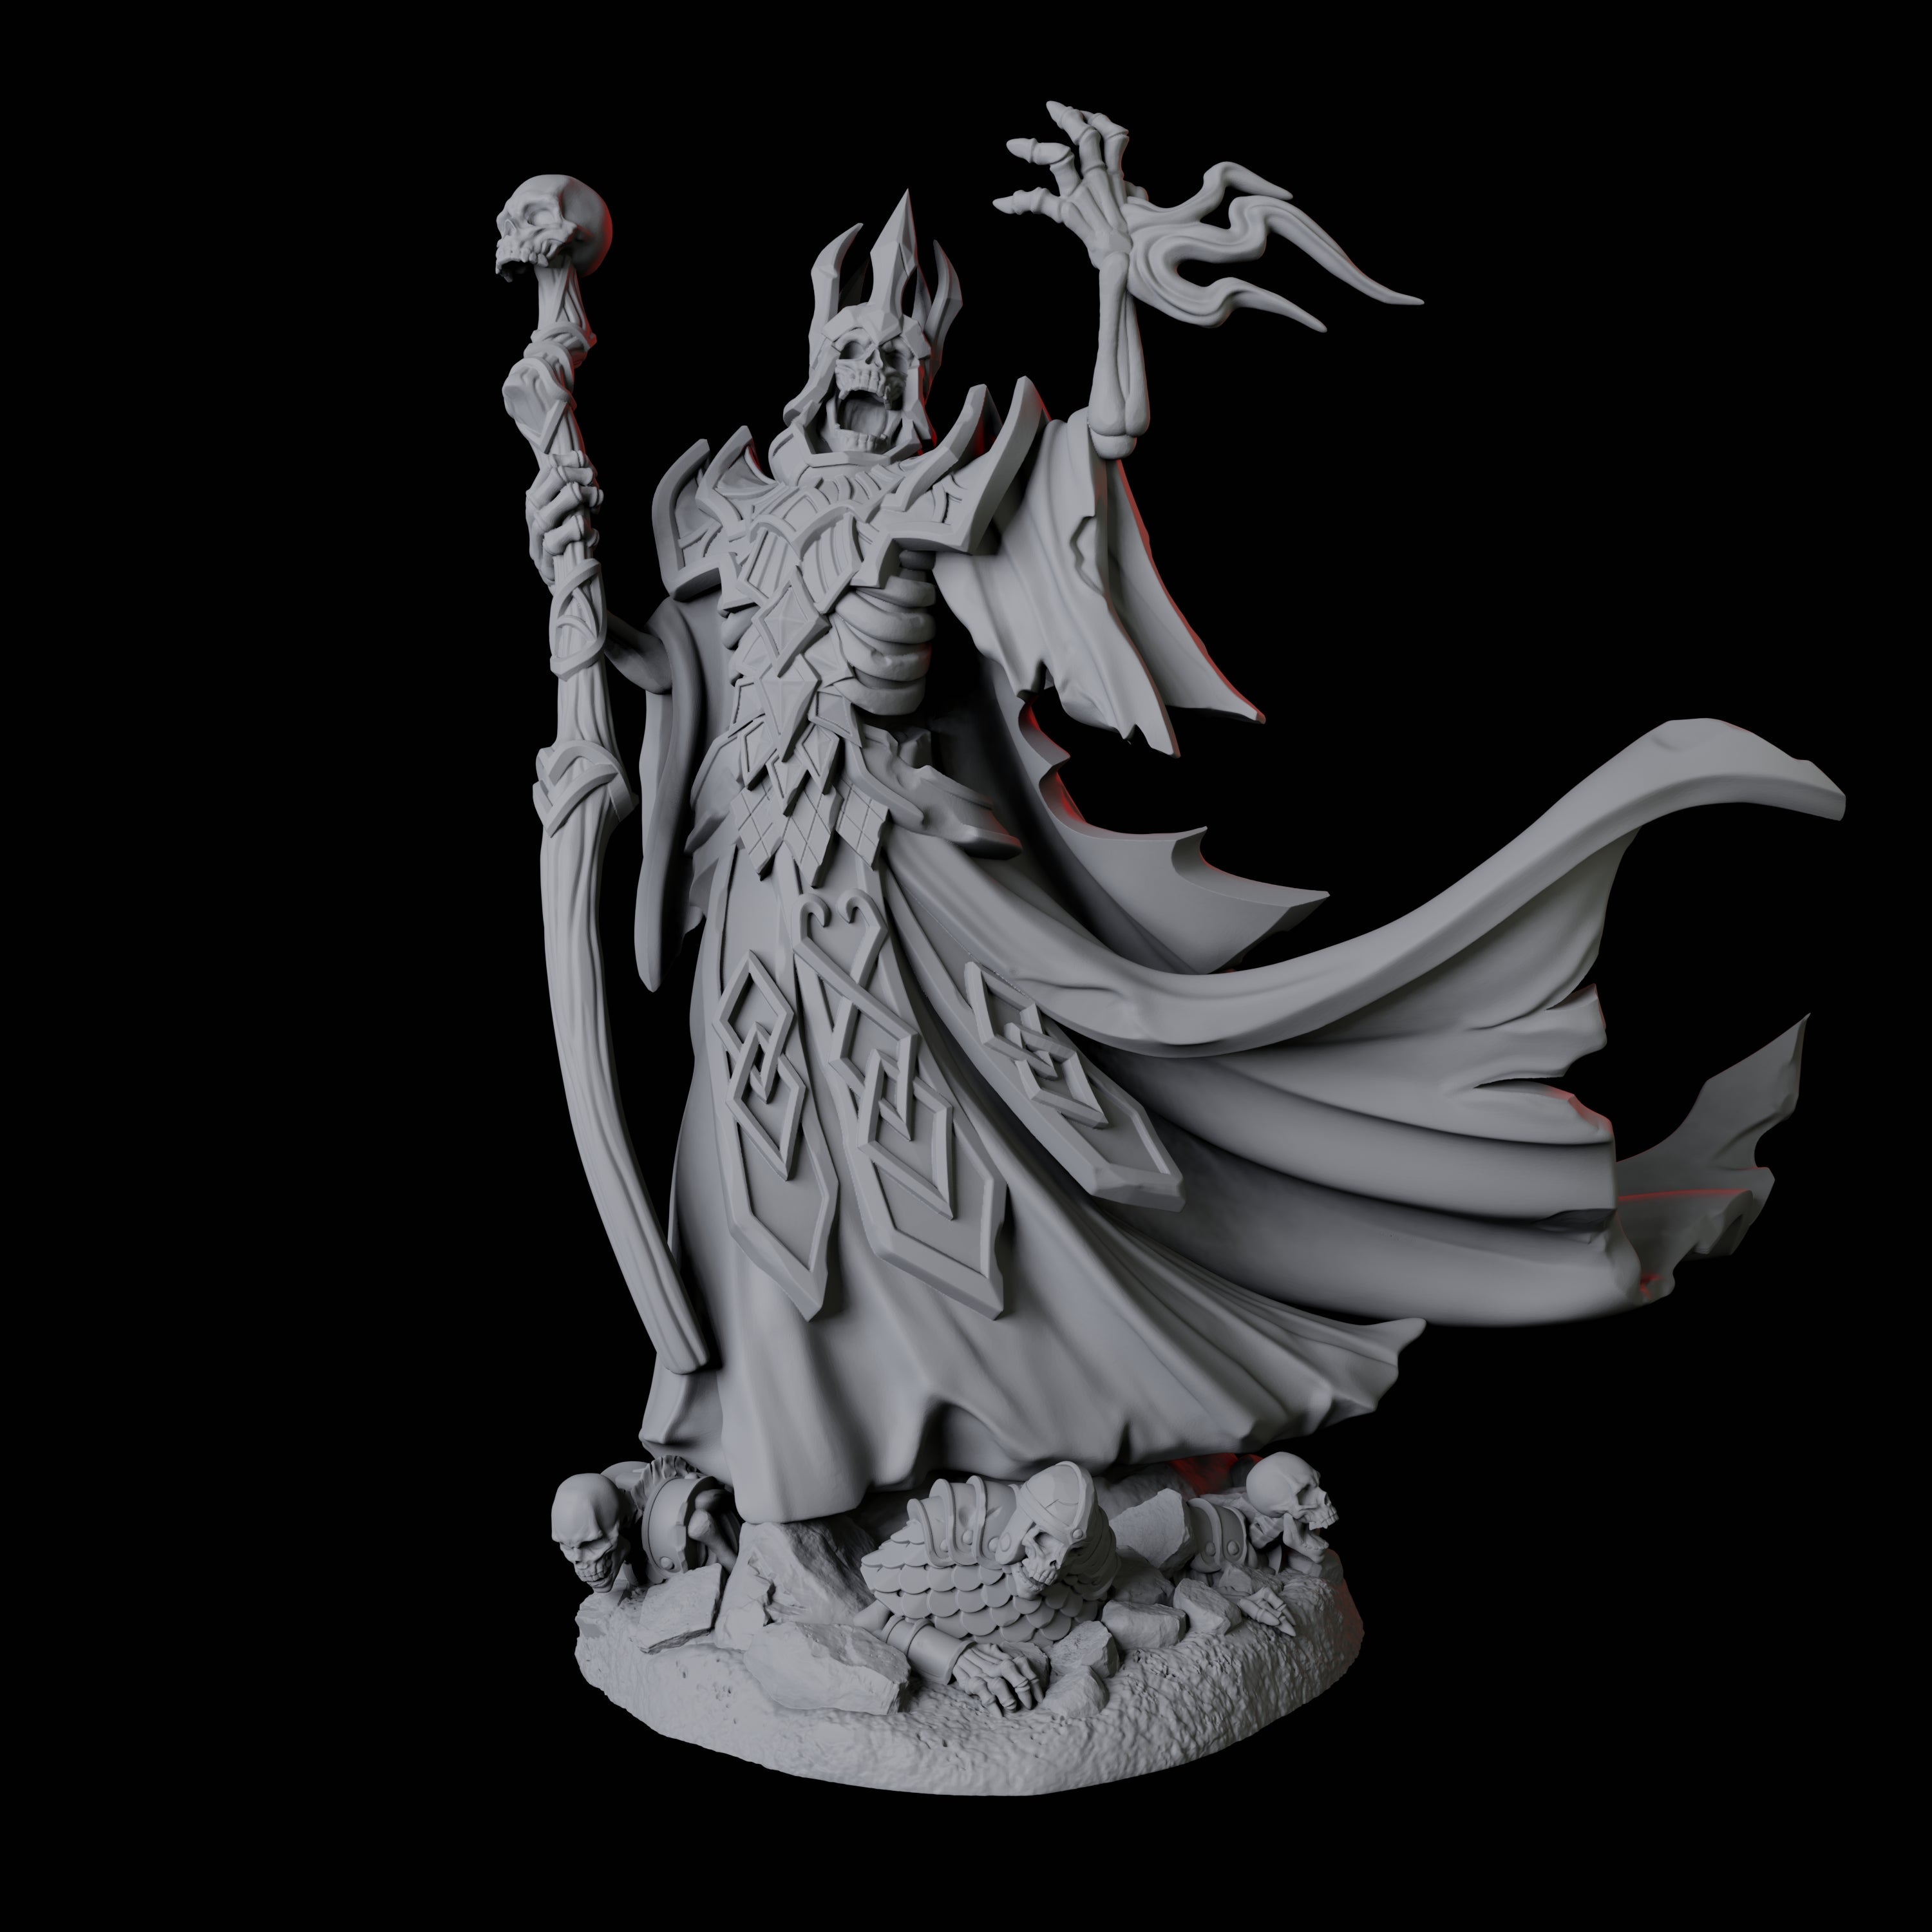 Renegade Lich Miniature for Dungeons and Dragons, Pathfinder or other TTRPGs